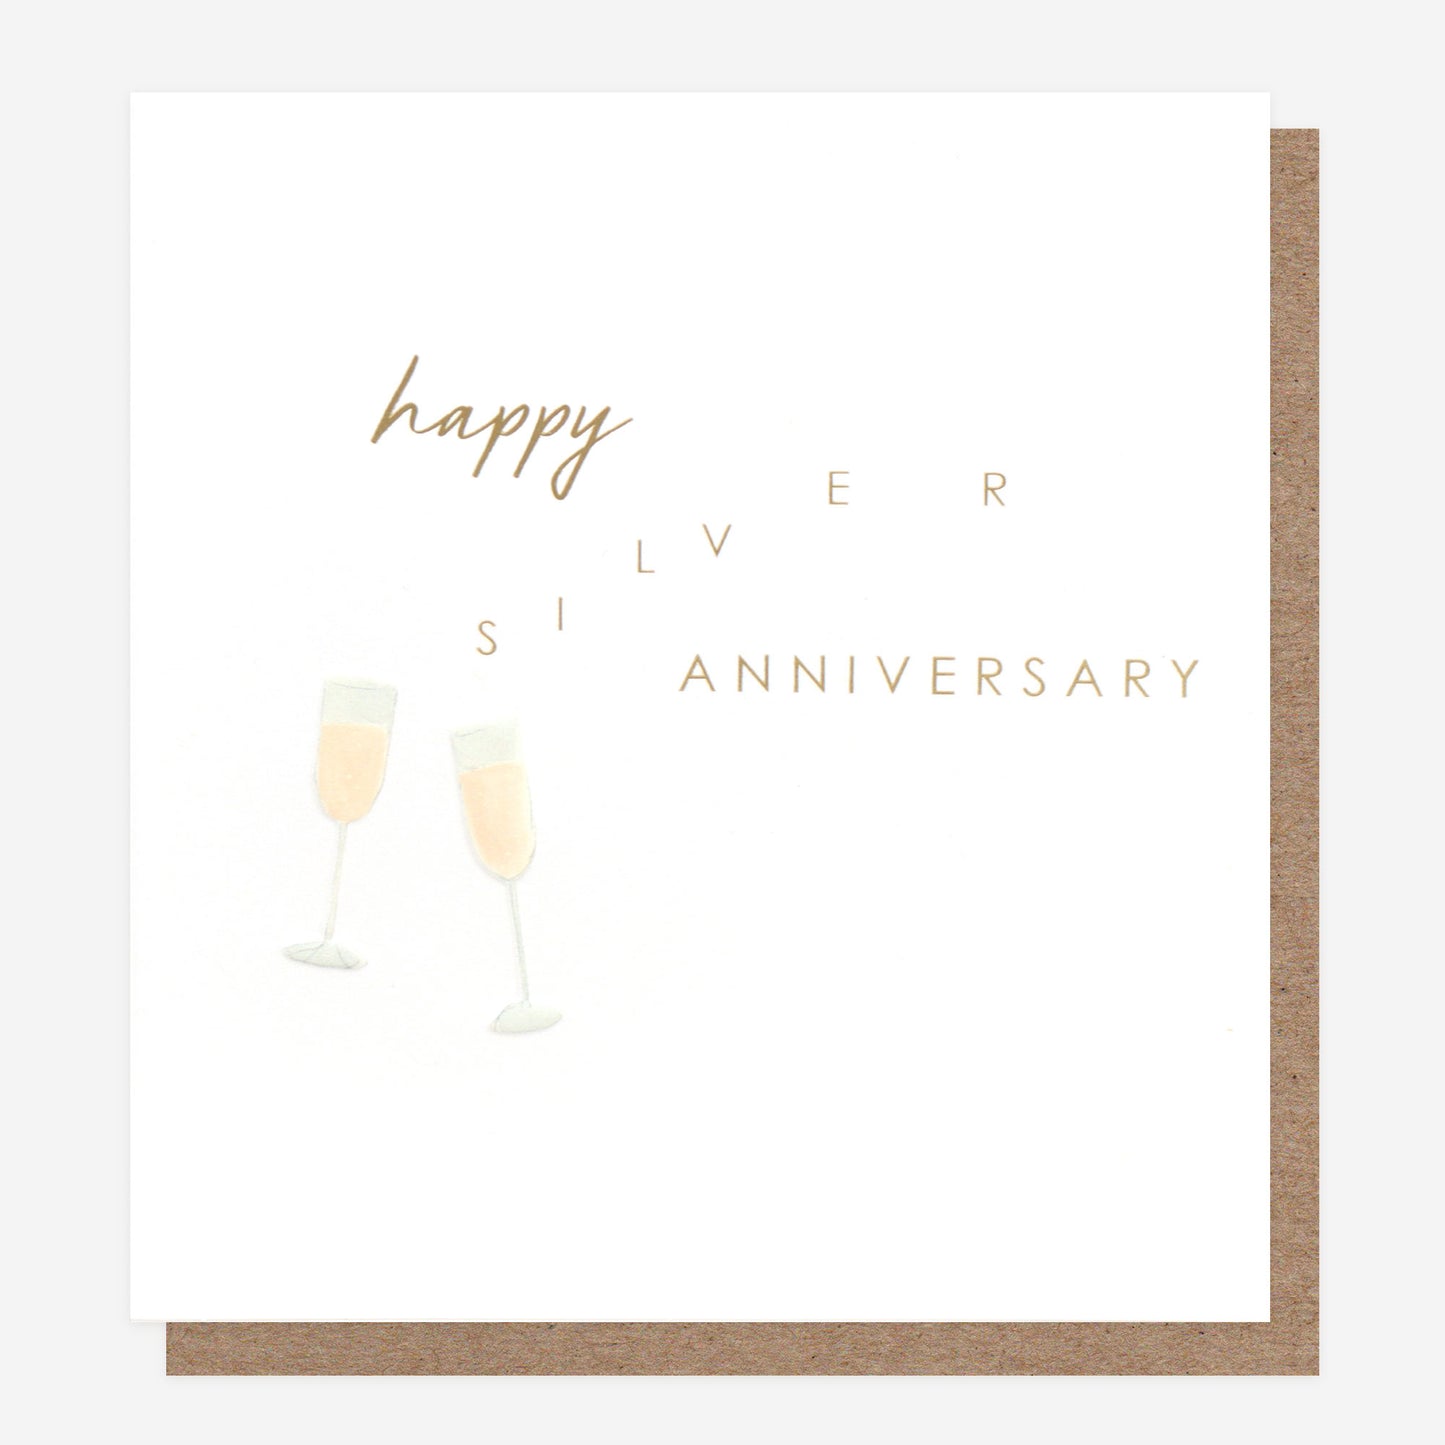 Happy Silver Anniversary Greetings Card